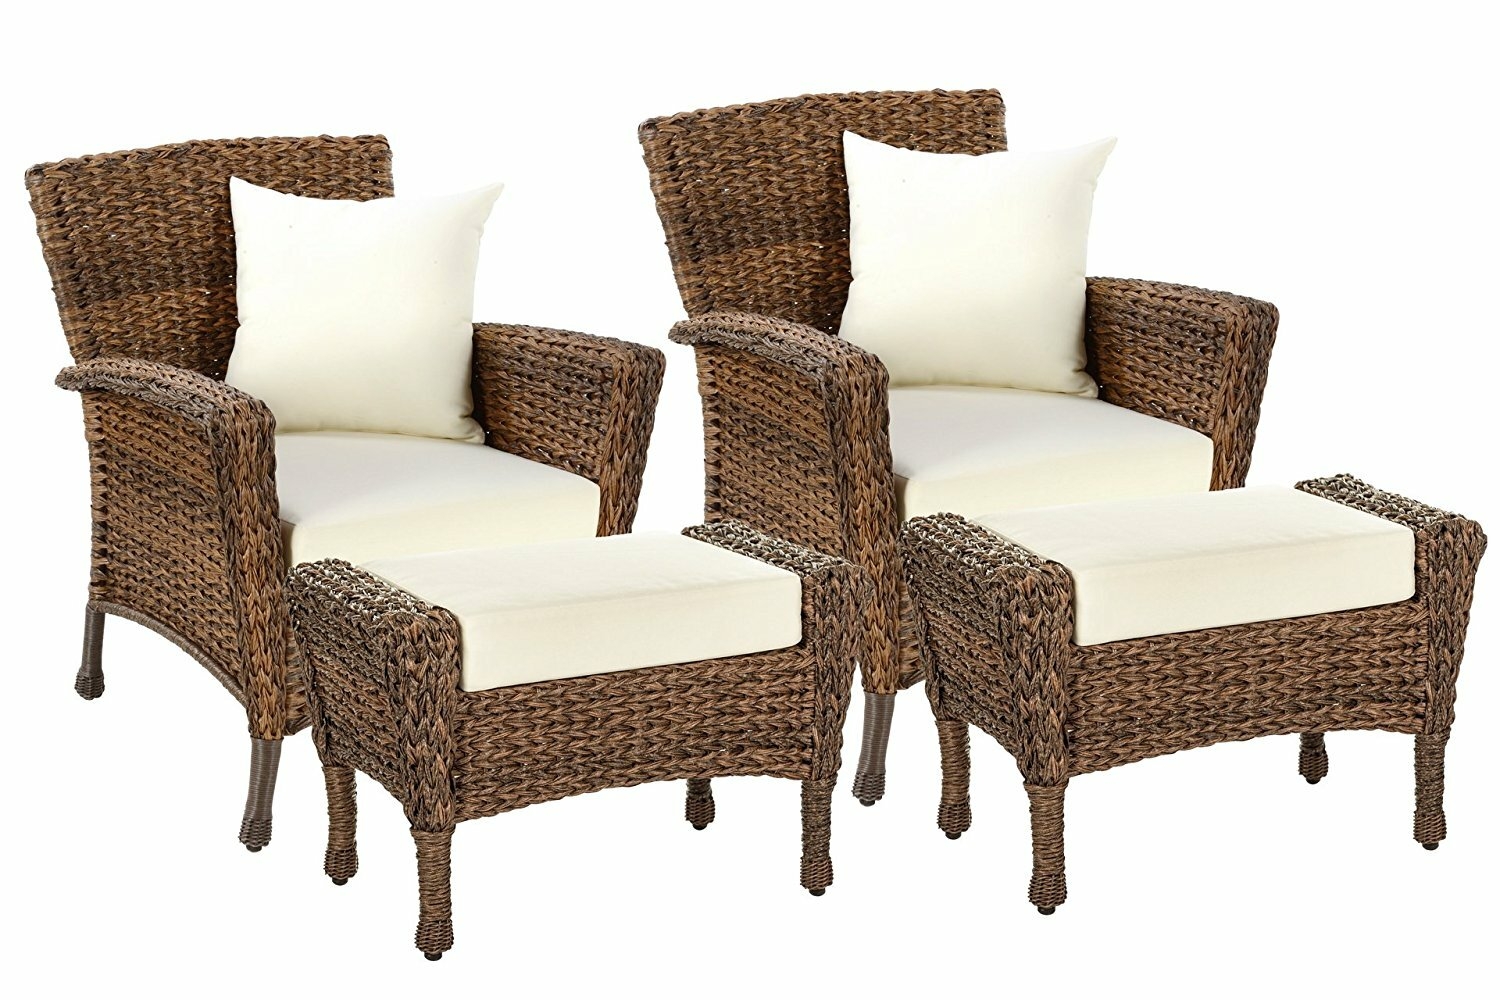 Outdoor Chairs With Ottoman You Ll Love In 2021 Visualhunt